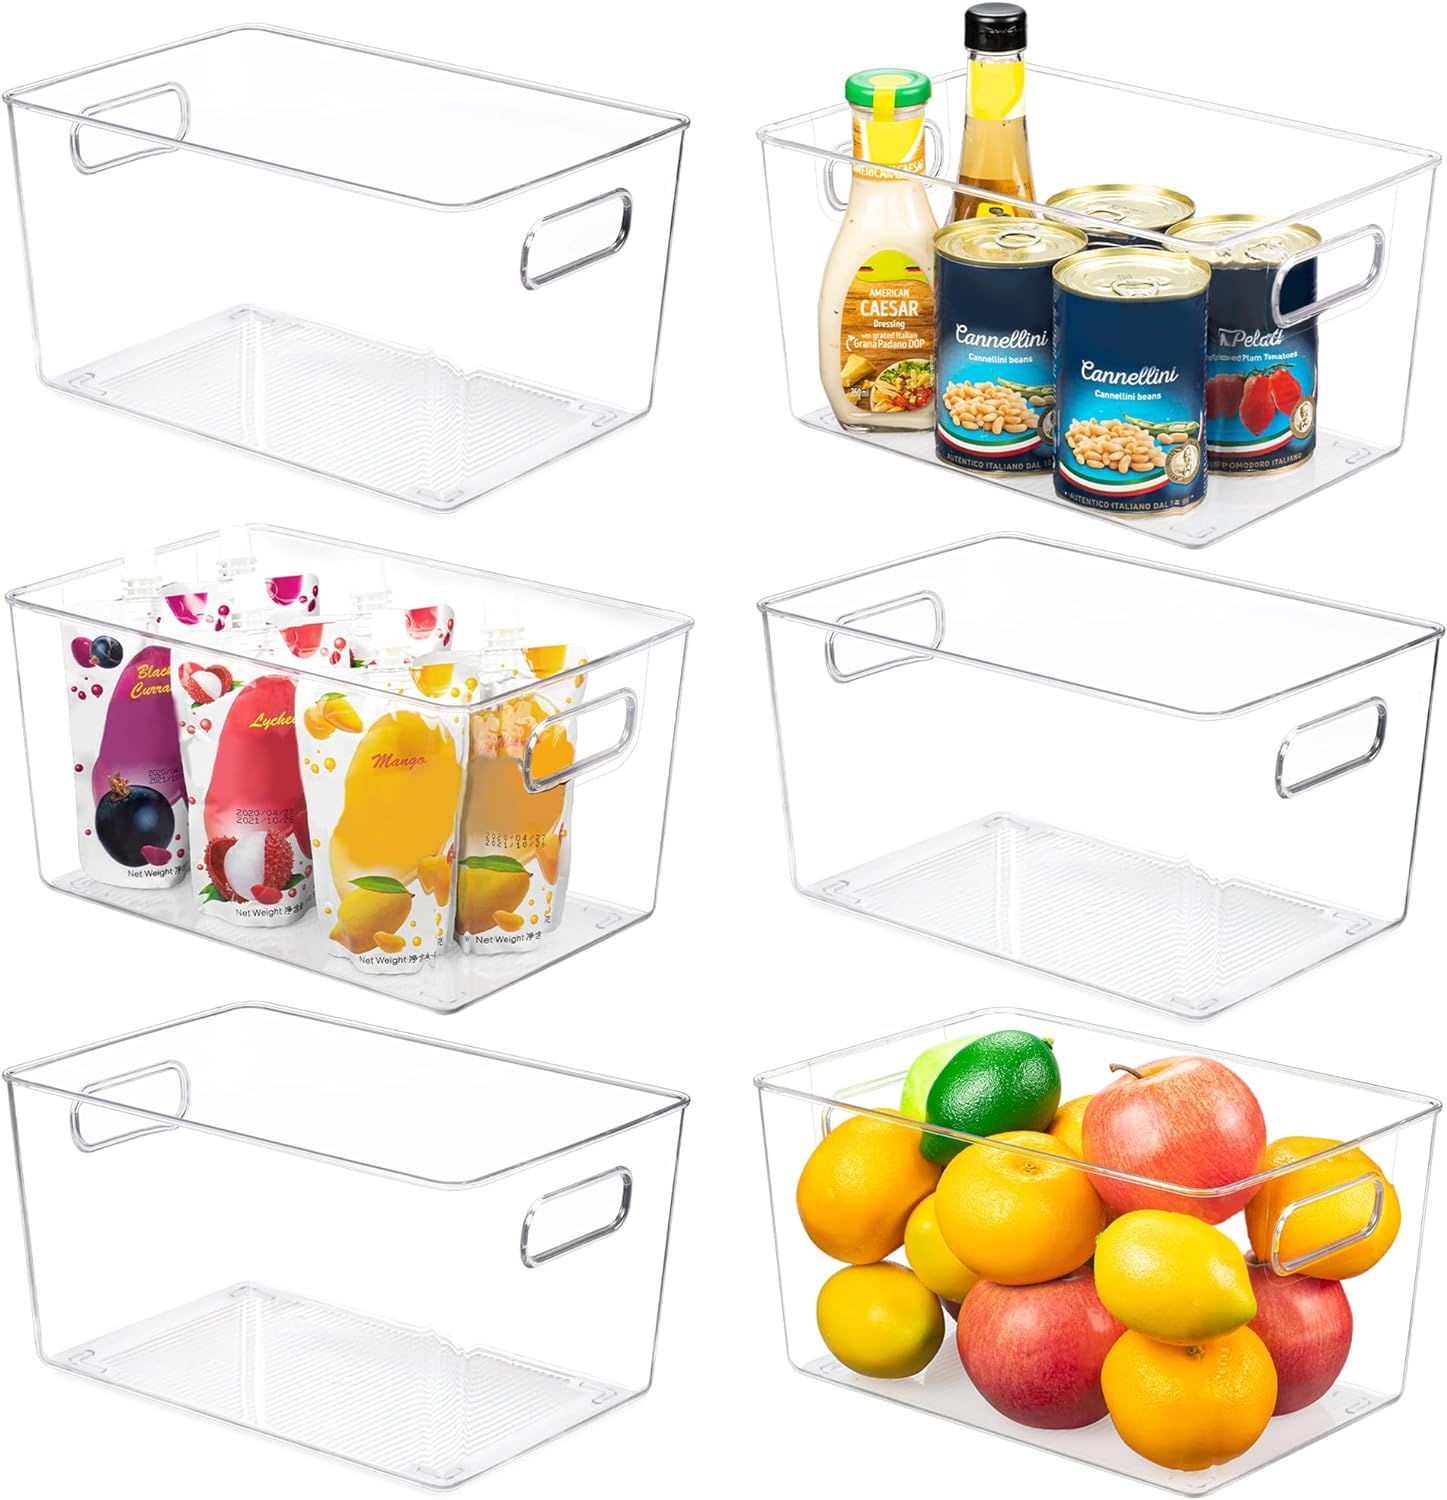 YIHONG Clear Pantry Storage Organizer Bins, 6 Pack Plastic Storage Containers with Handle for Kit... | Amazon (US)